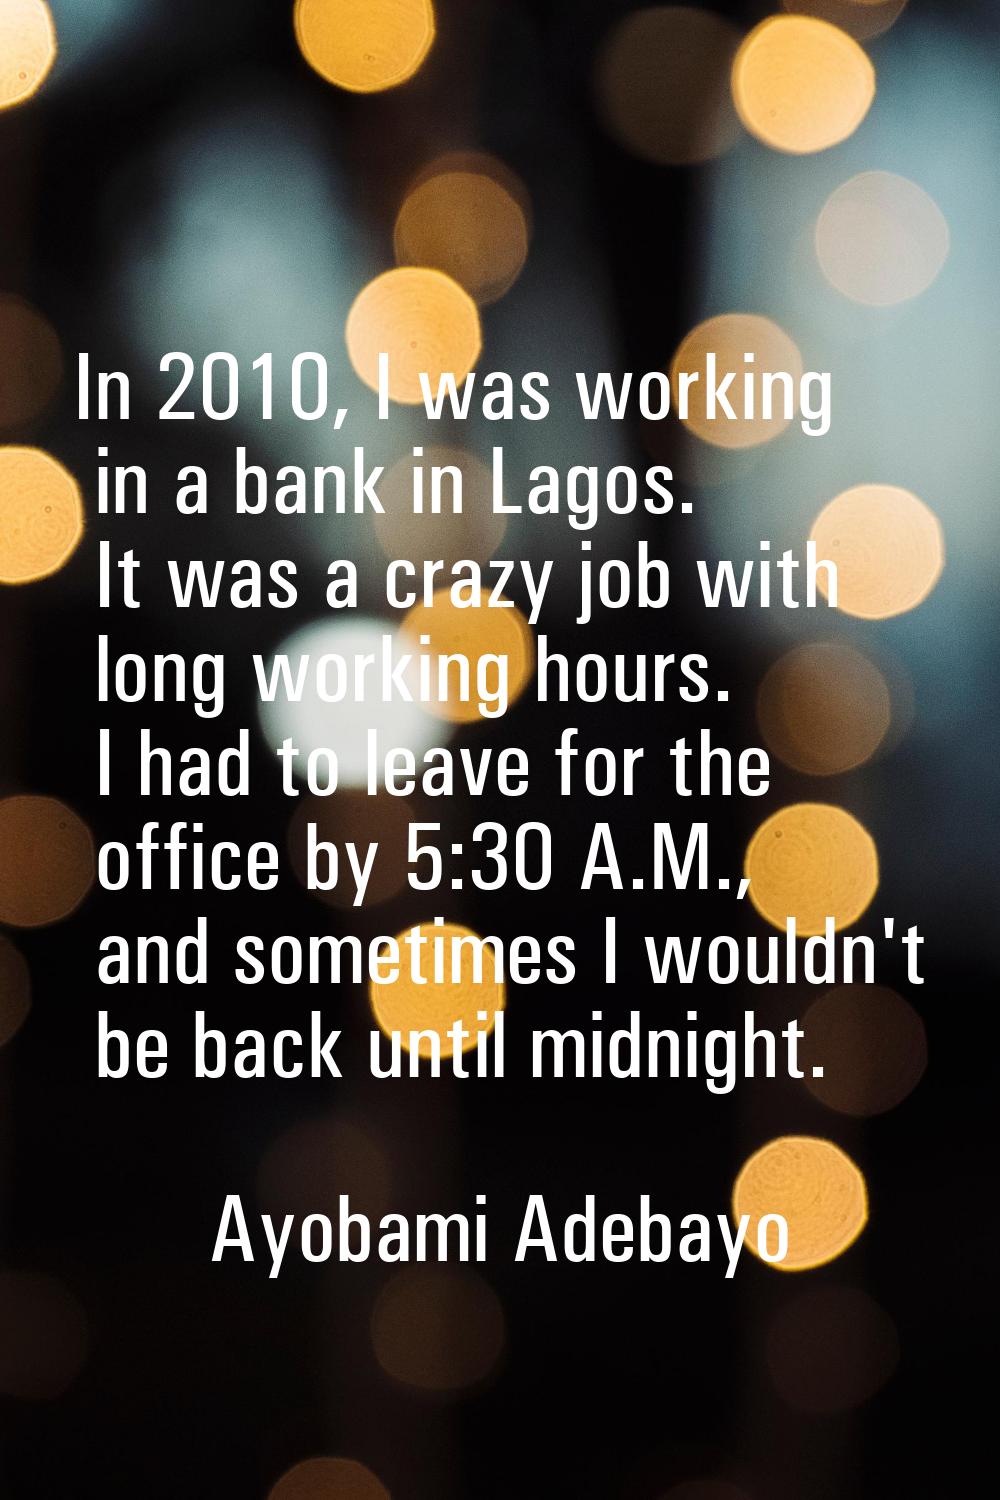 In 2010, I was working in a bank in Lagos. It was a crazy job with long working hours. I had to lea